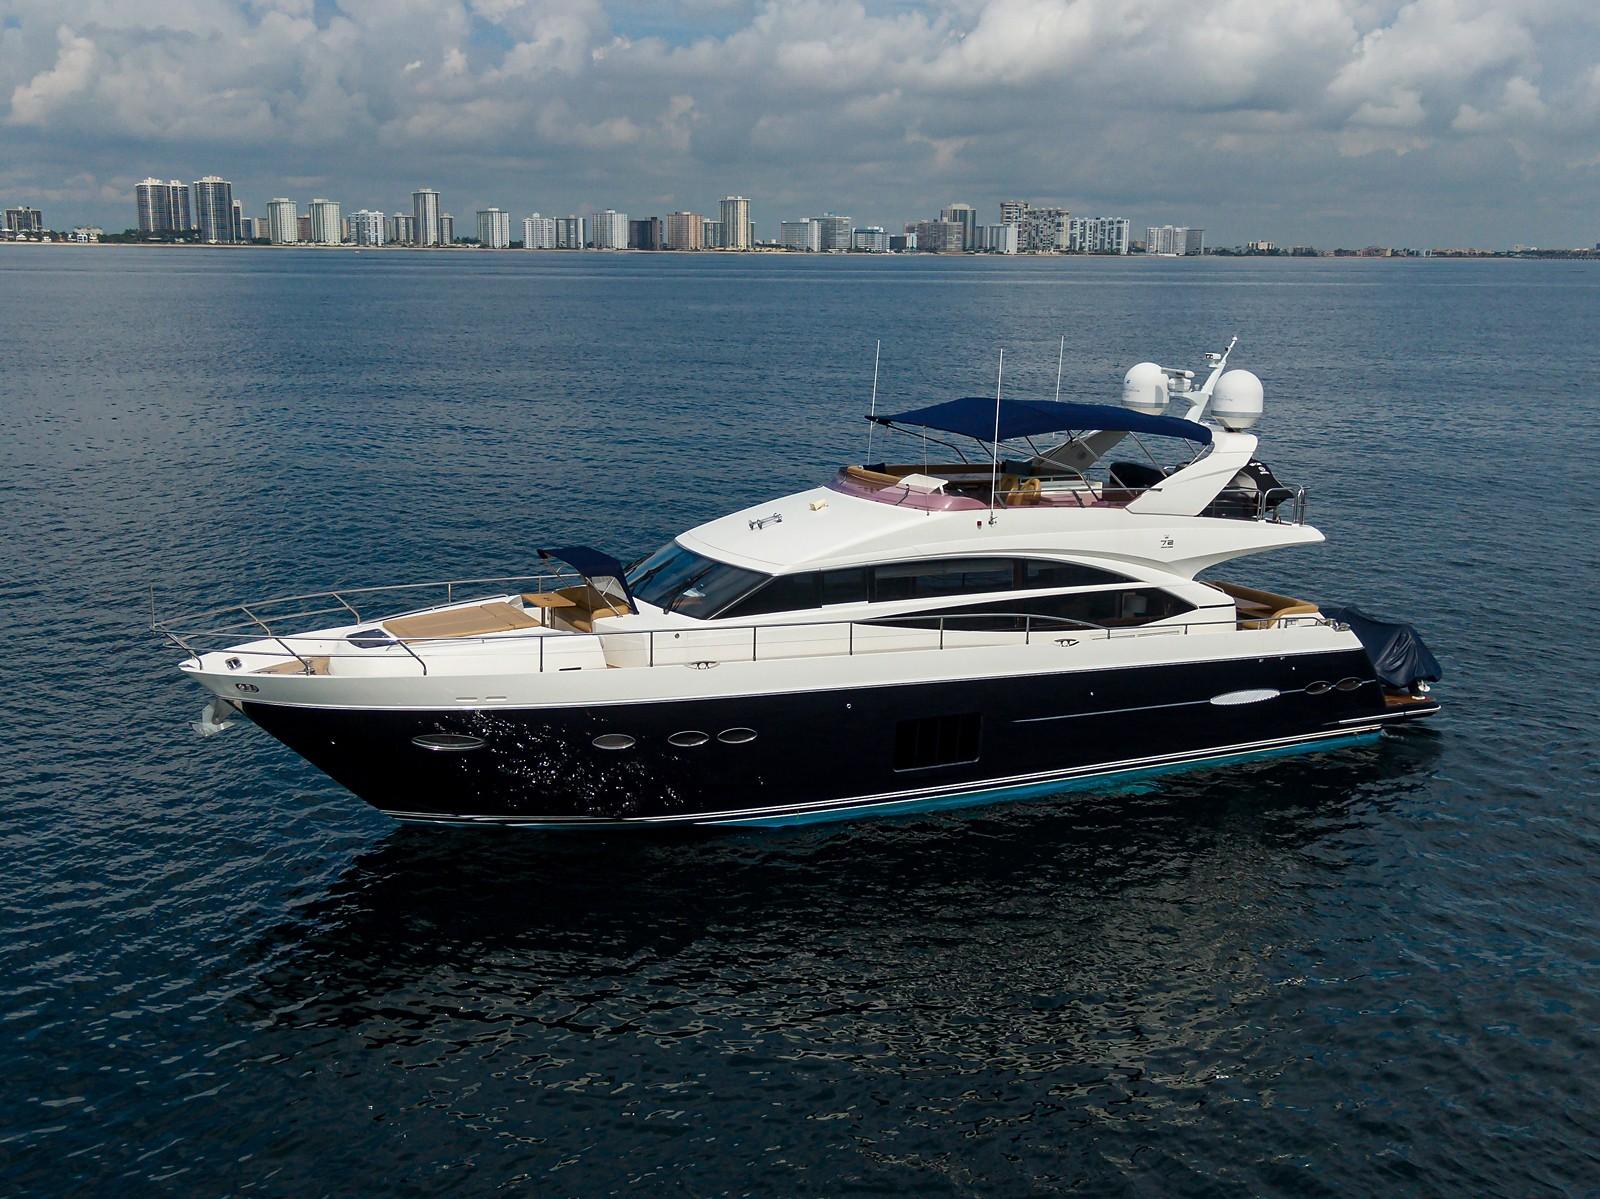 72 ft yachts for sale